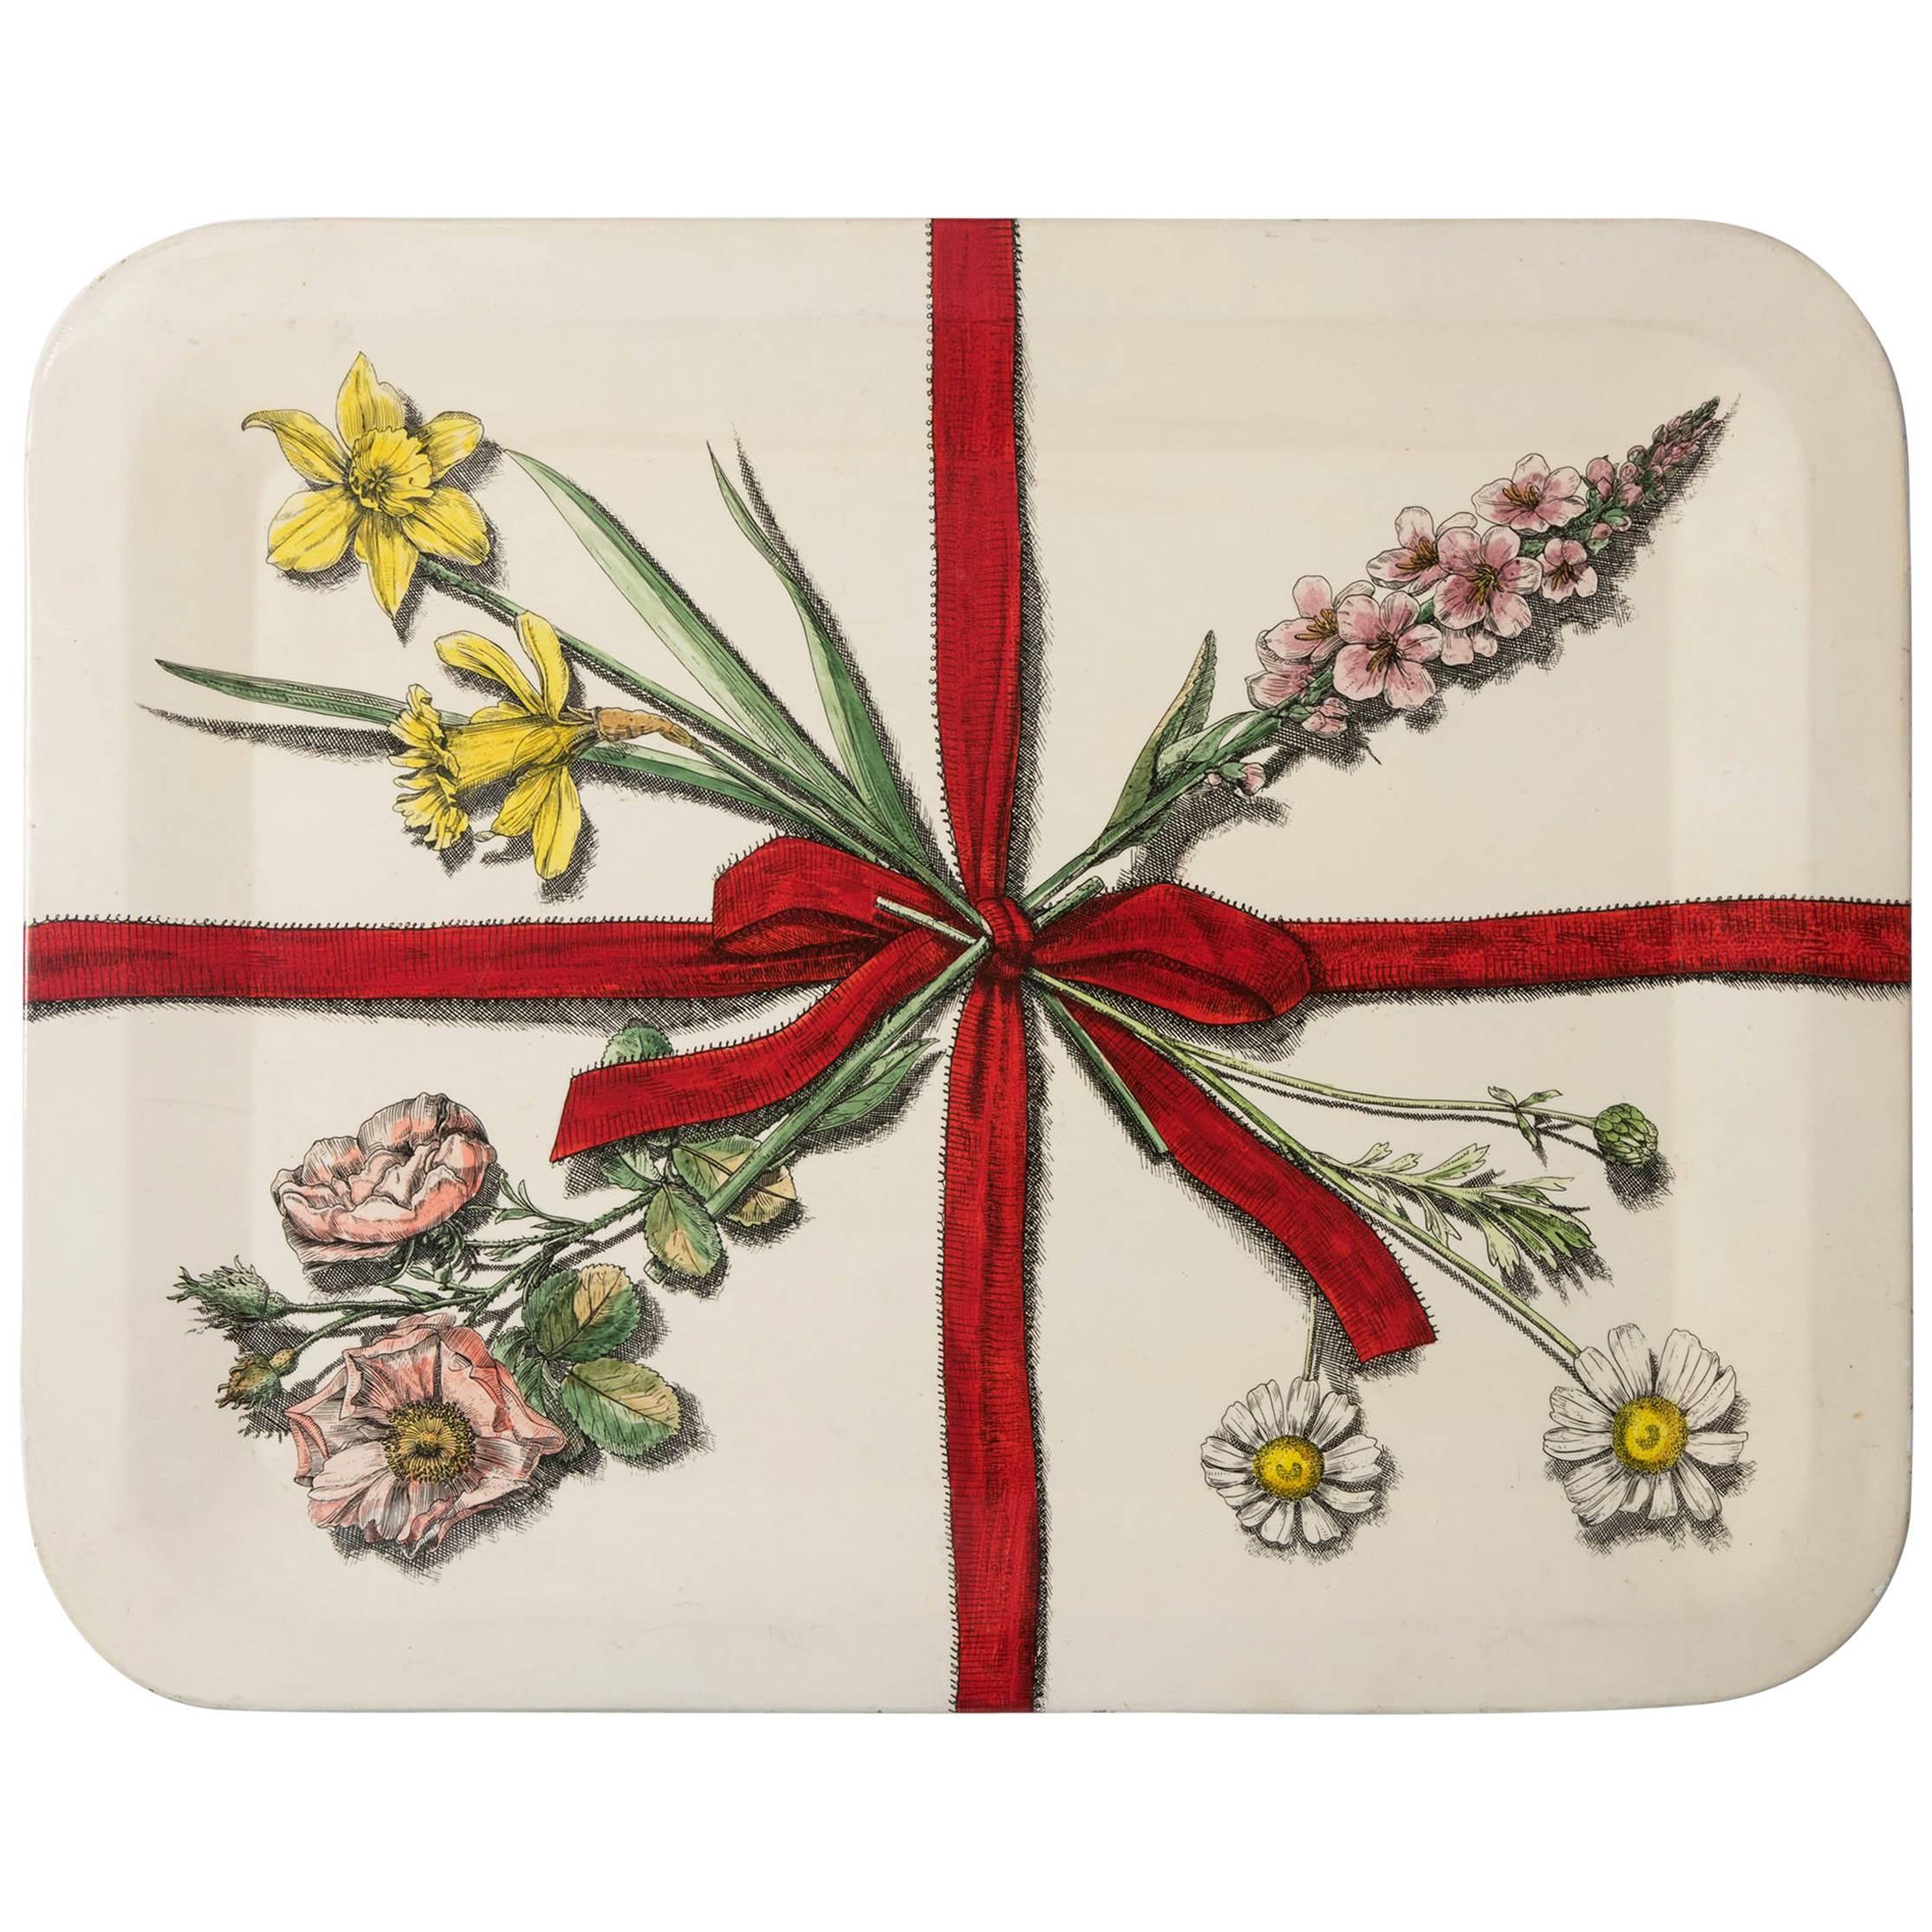 Piero Fornasetti metal tray with flowers and red ribbons, Italy circa 1950